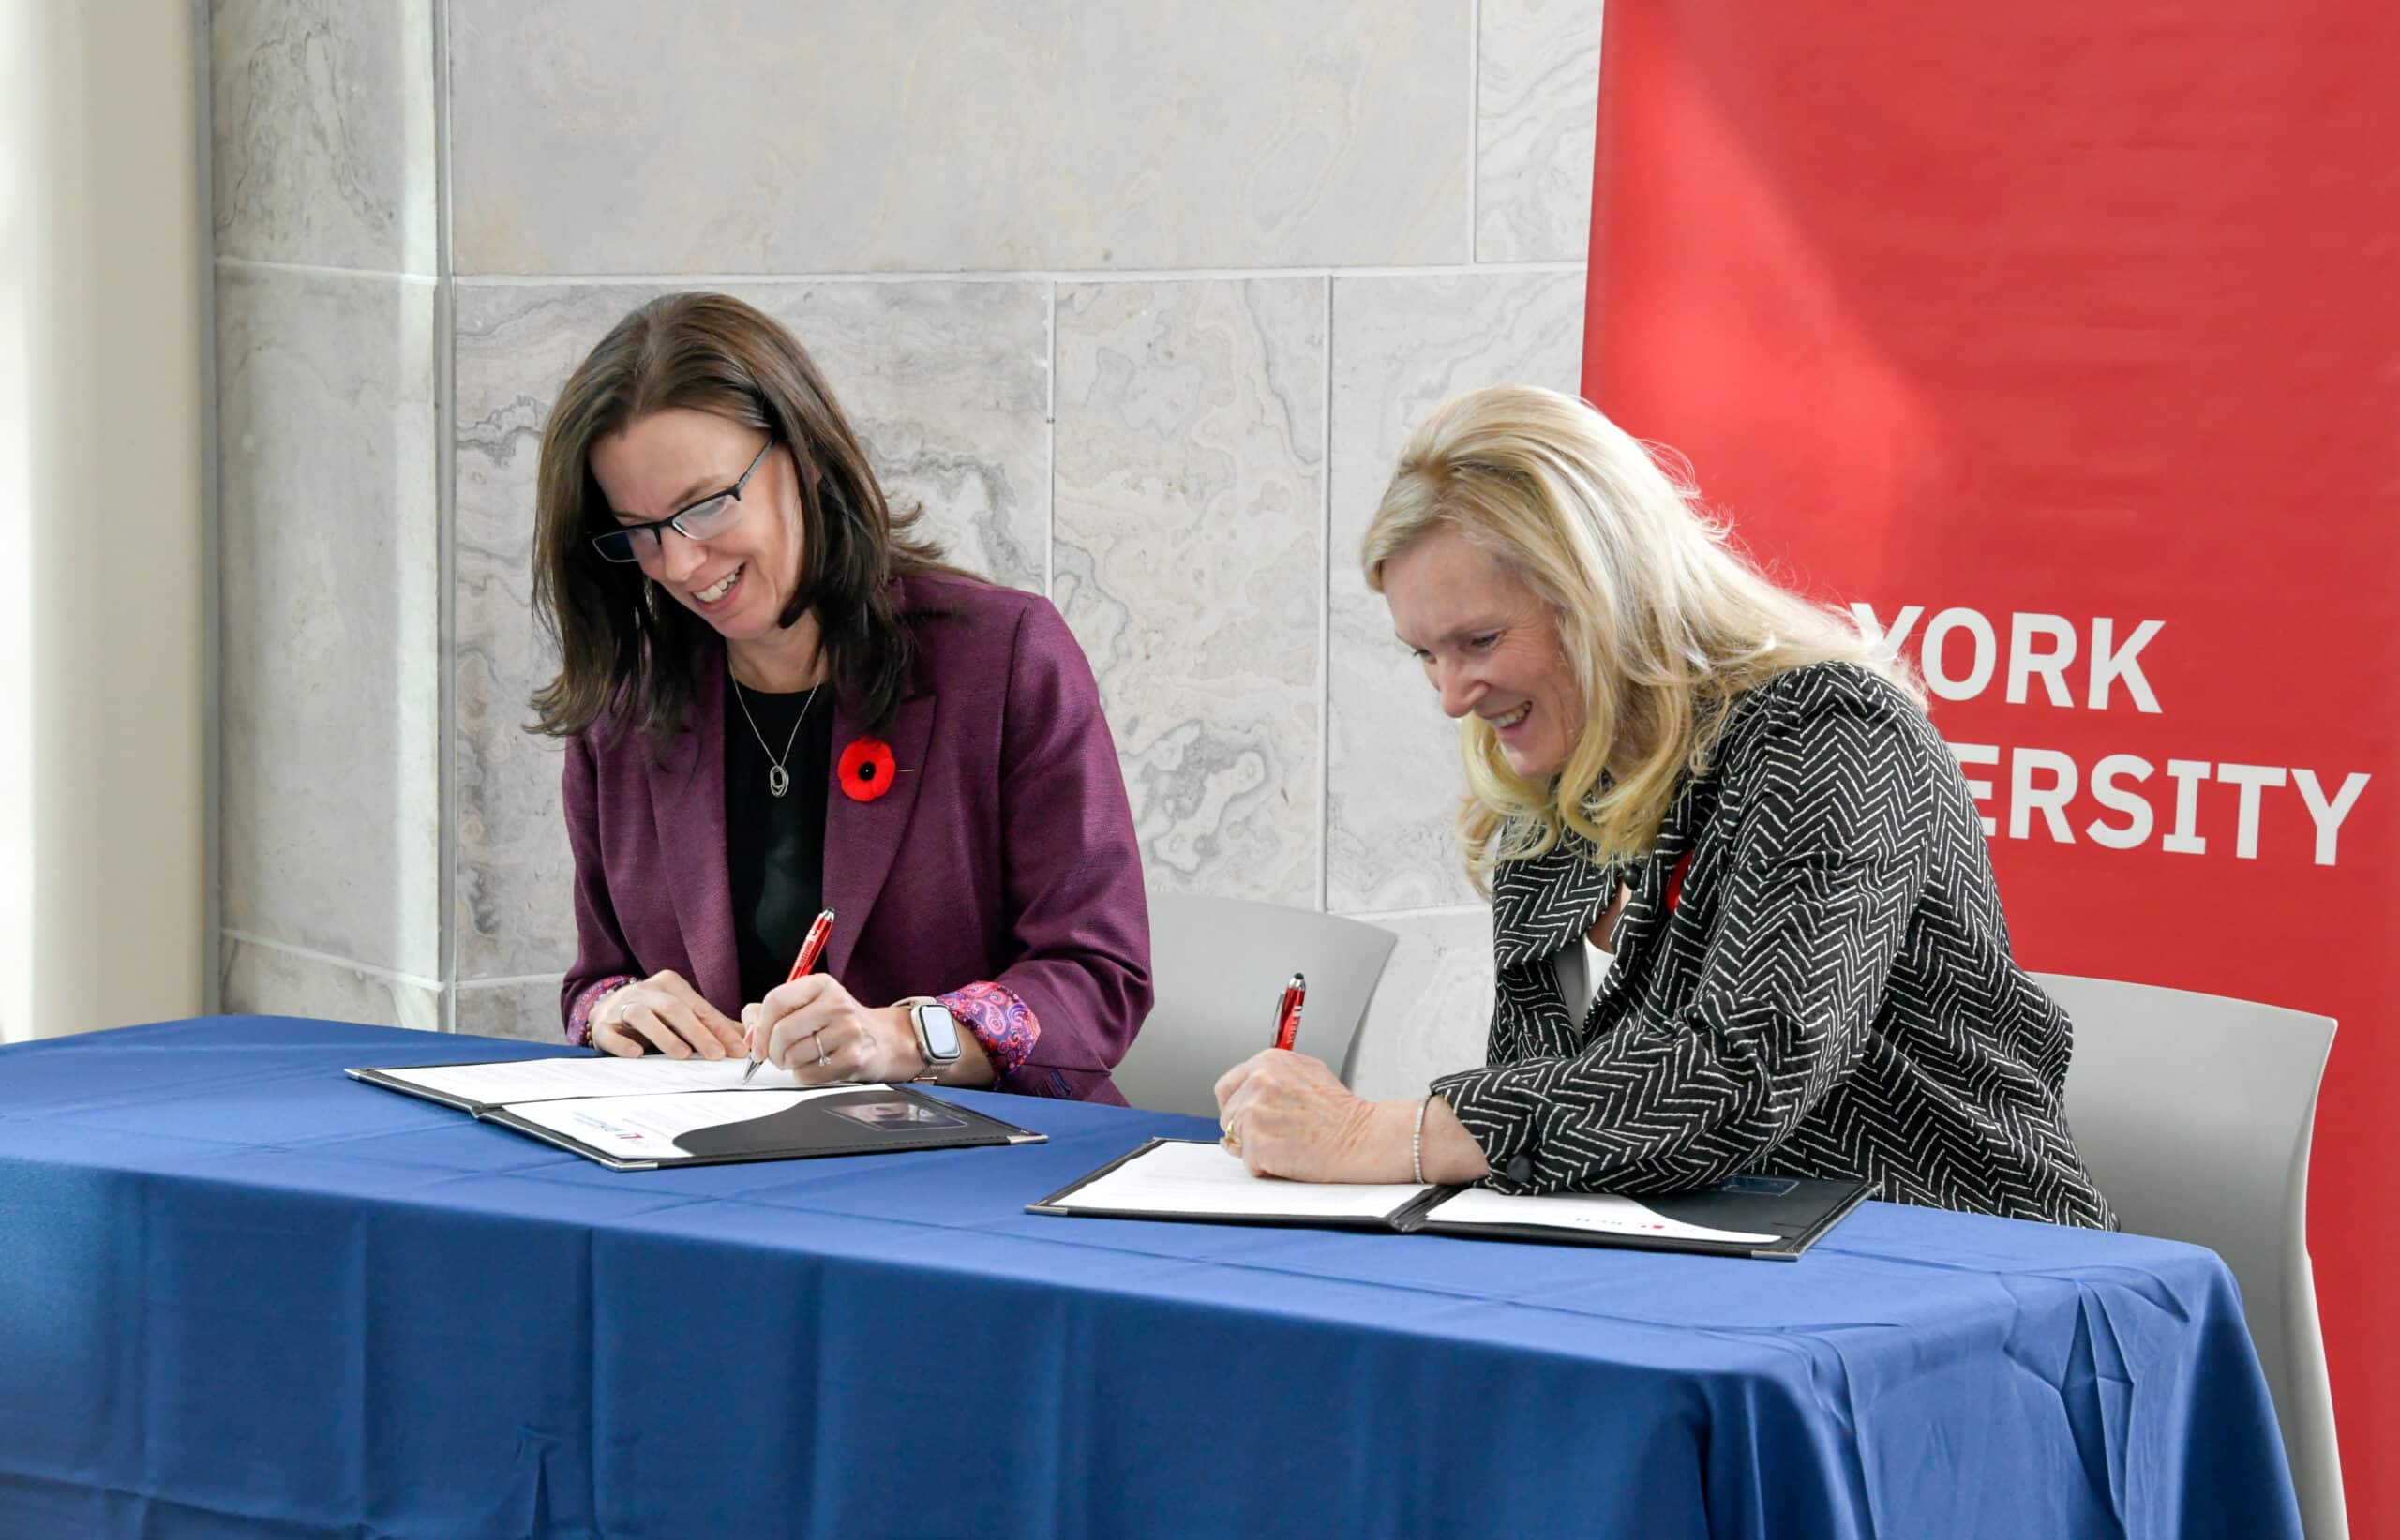 RVH and York University Sign MOU to Promote Academic Teaching and Applied Research